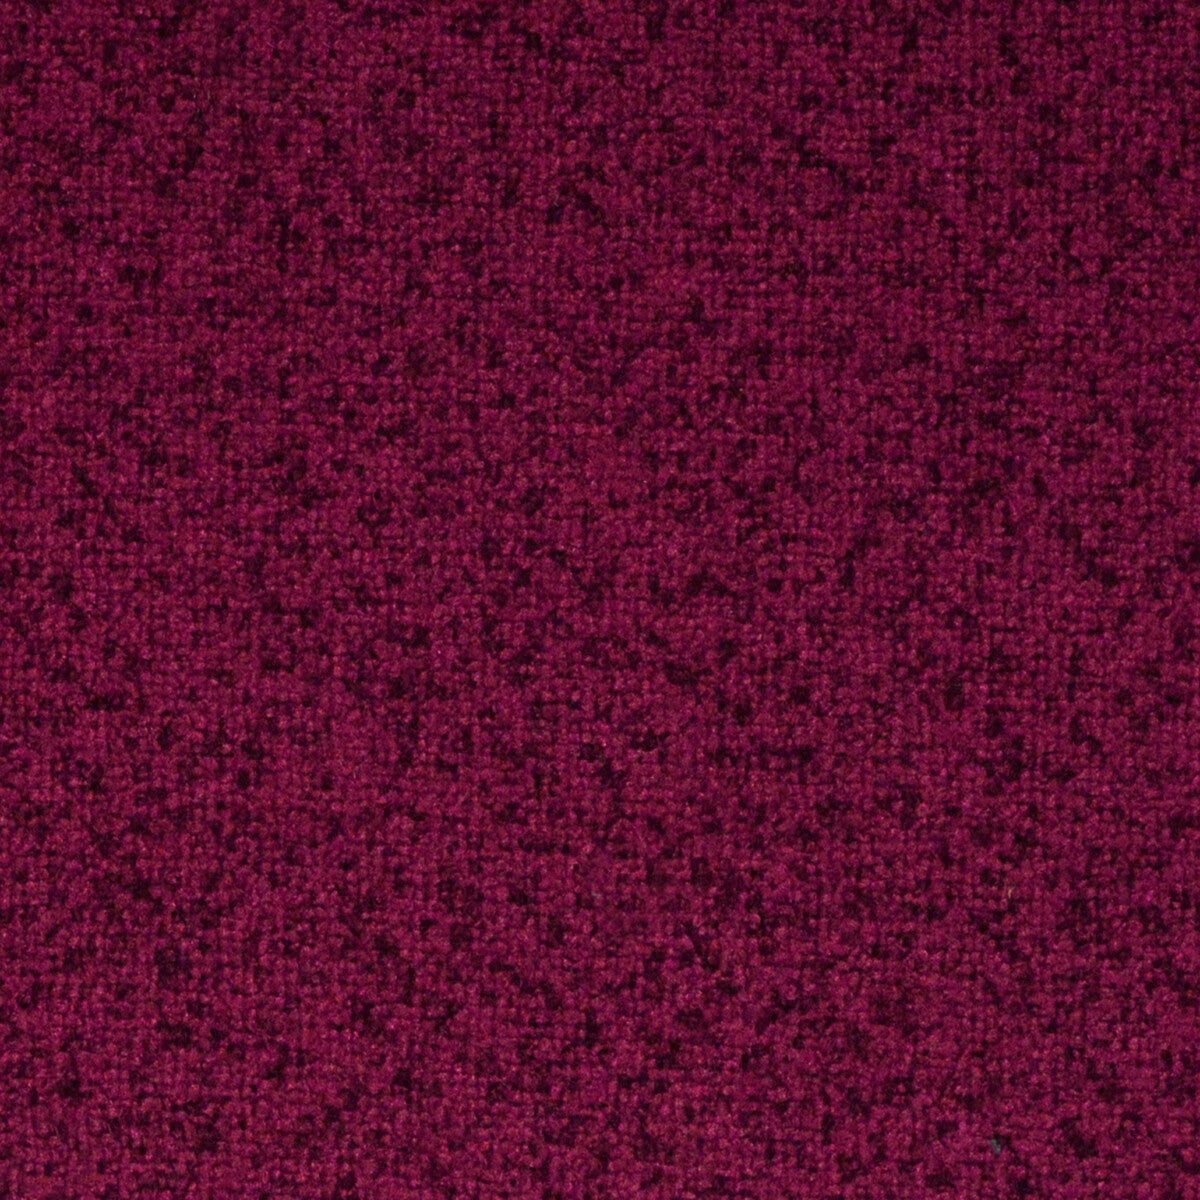 Kravet Contract fabric in 35181-9 color - pattern 35181.9.0 - by Kravet Contract